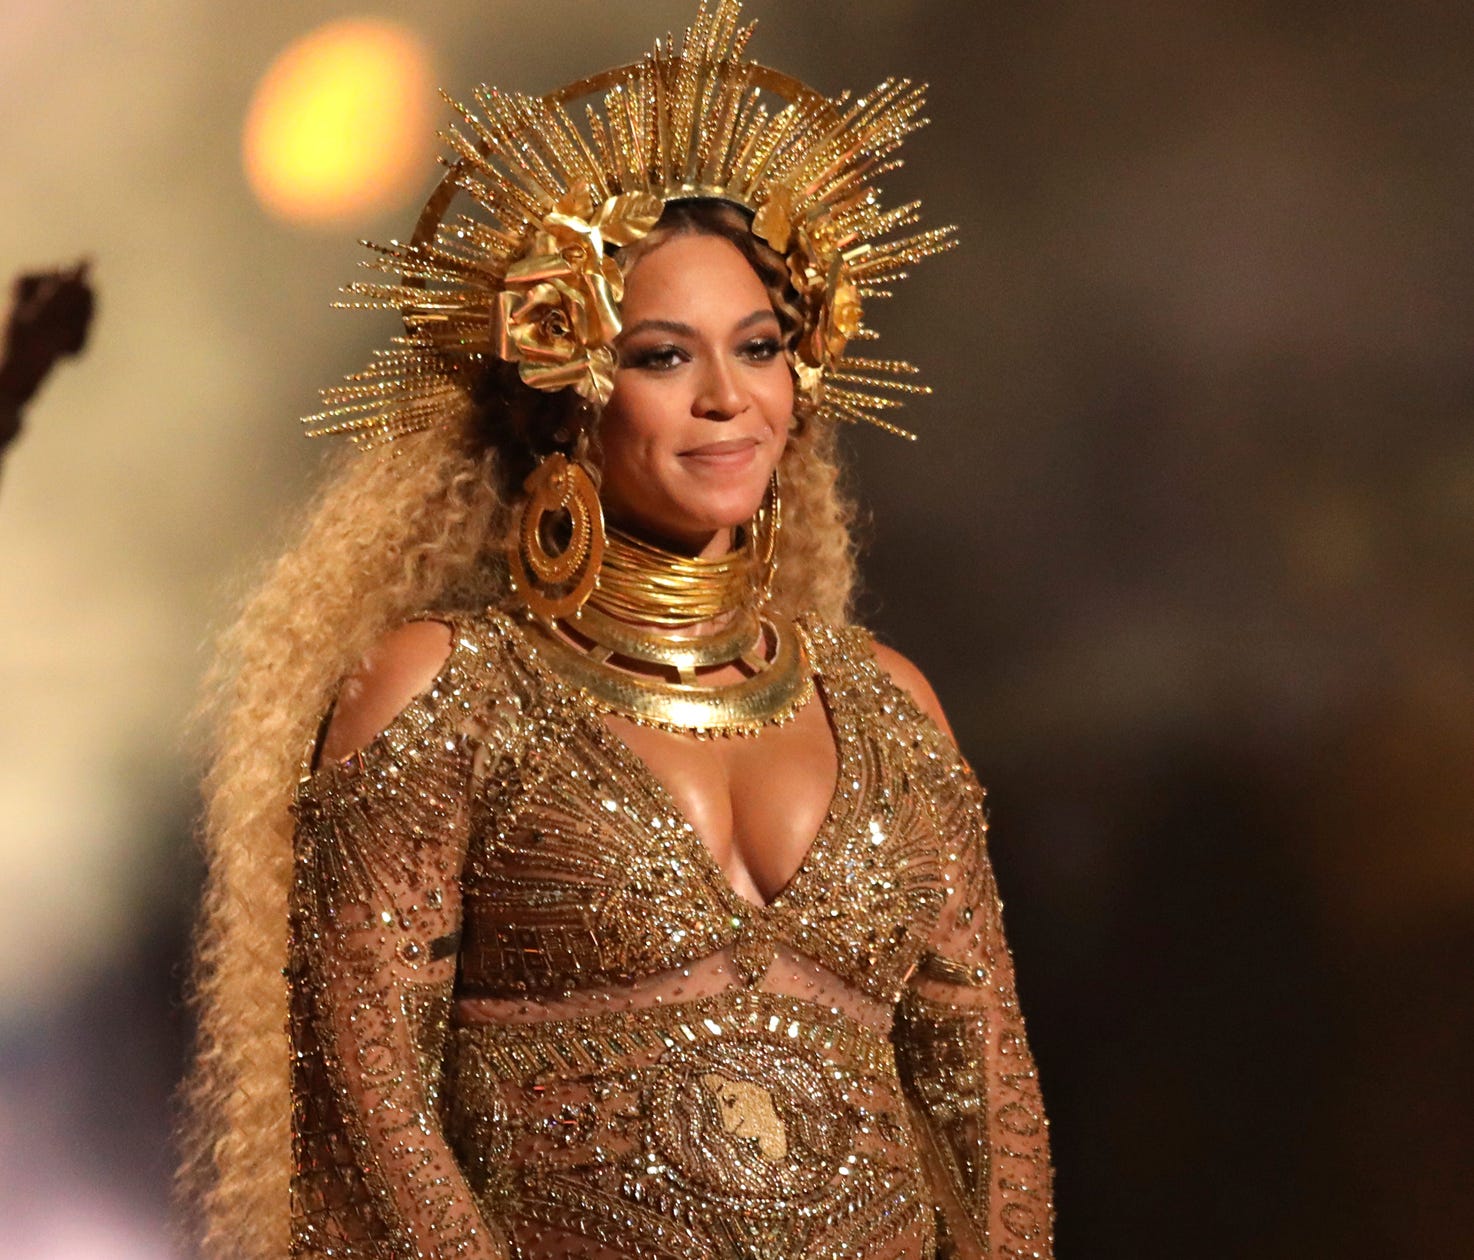 Beyonce granted a terminally ill teen the phone call of a lifetime.